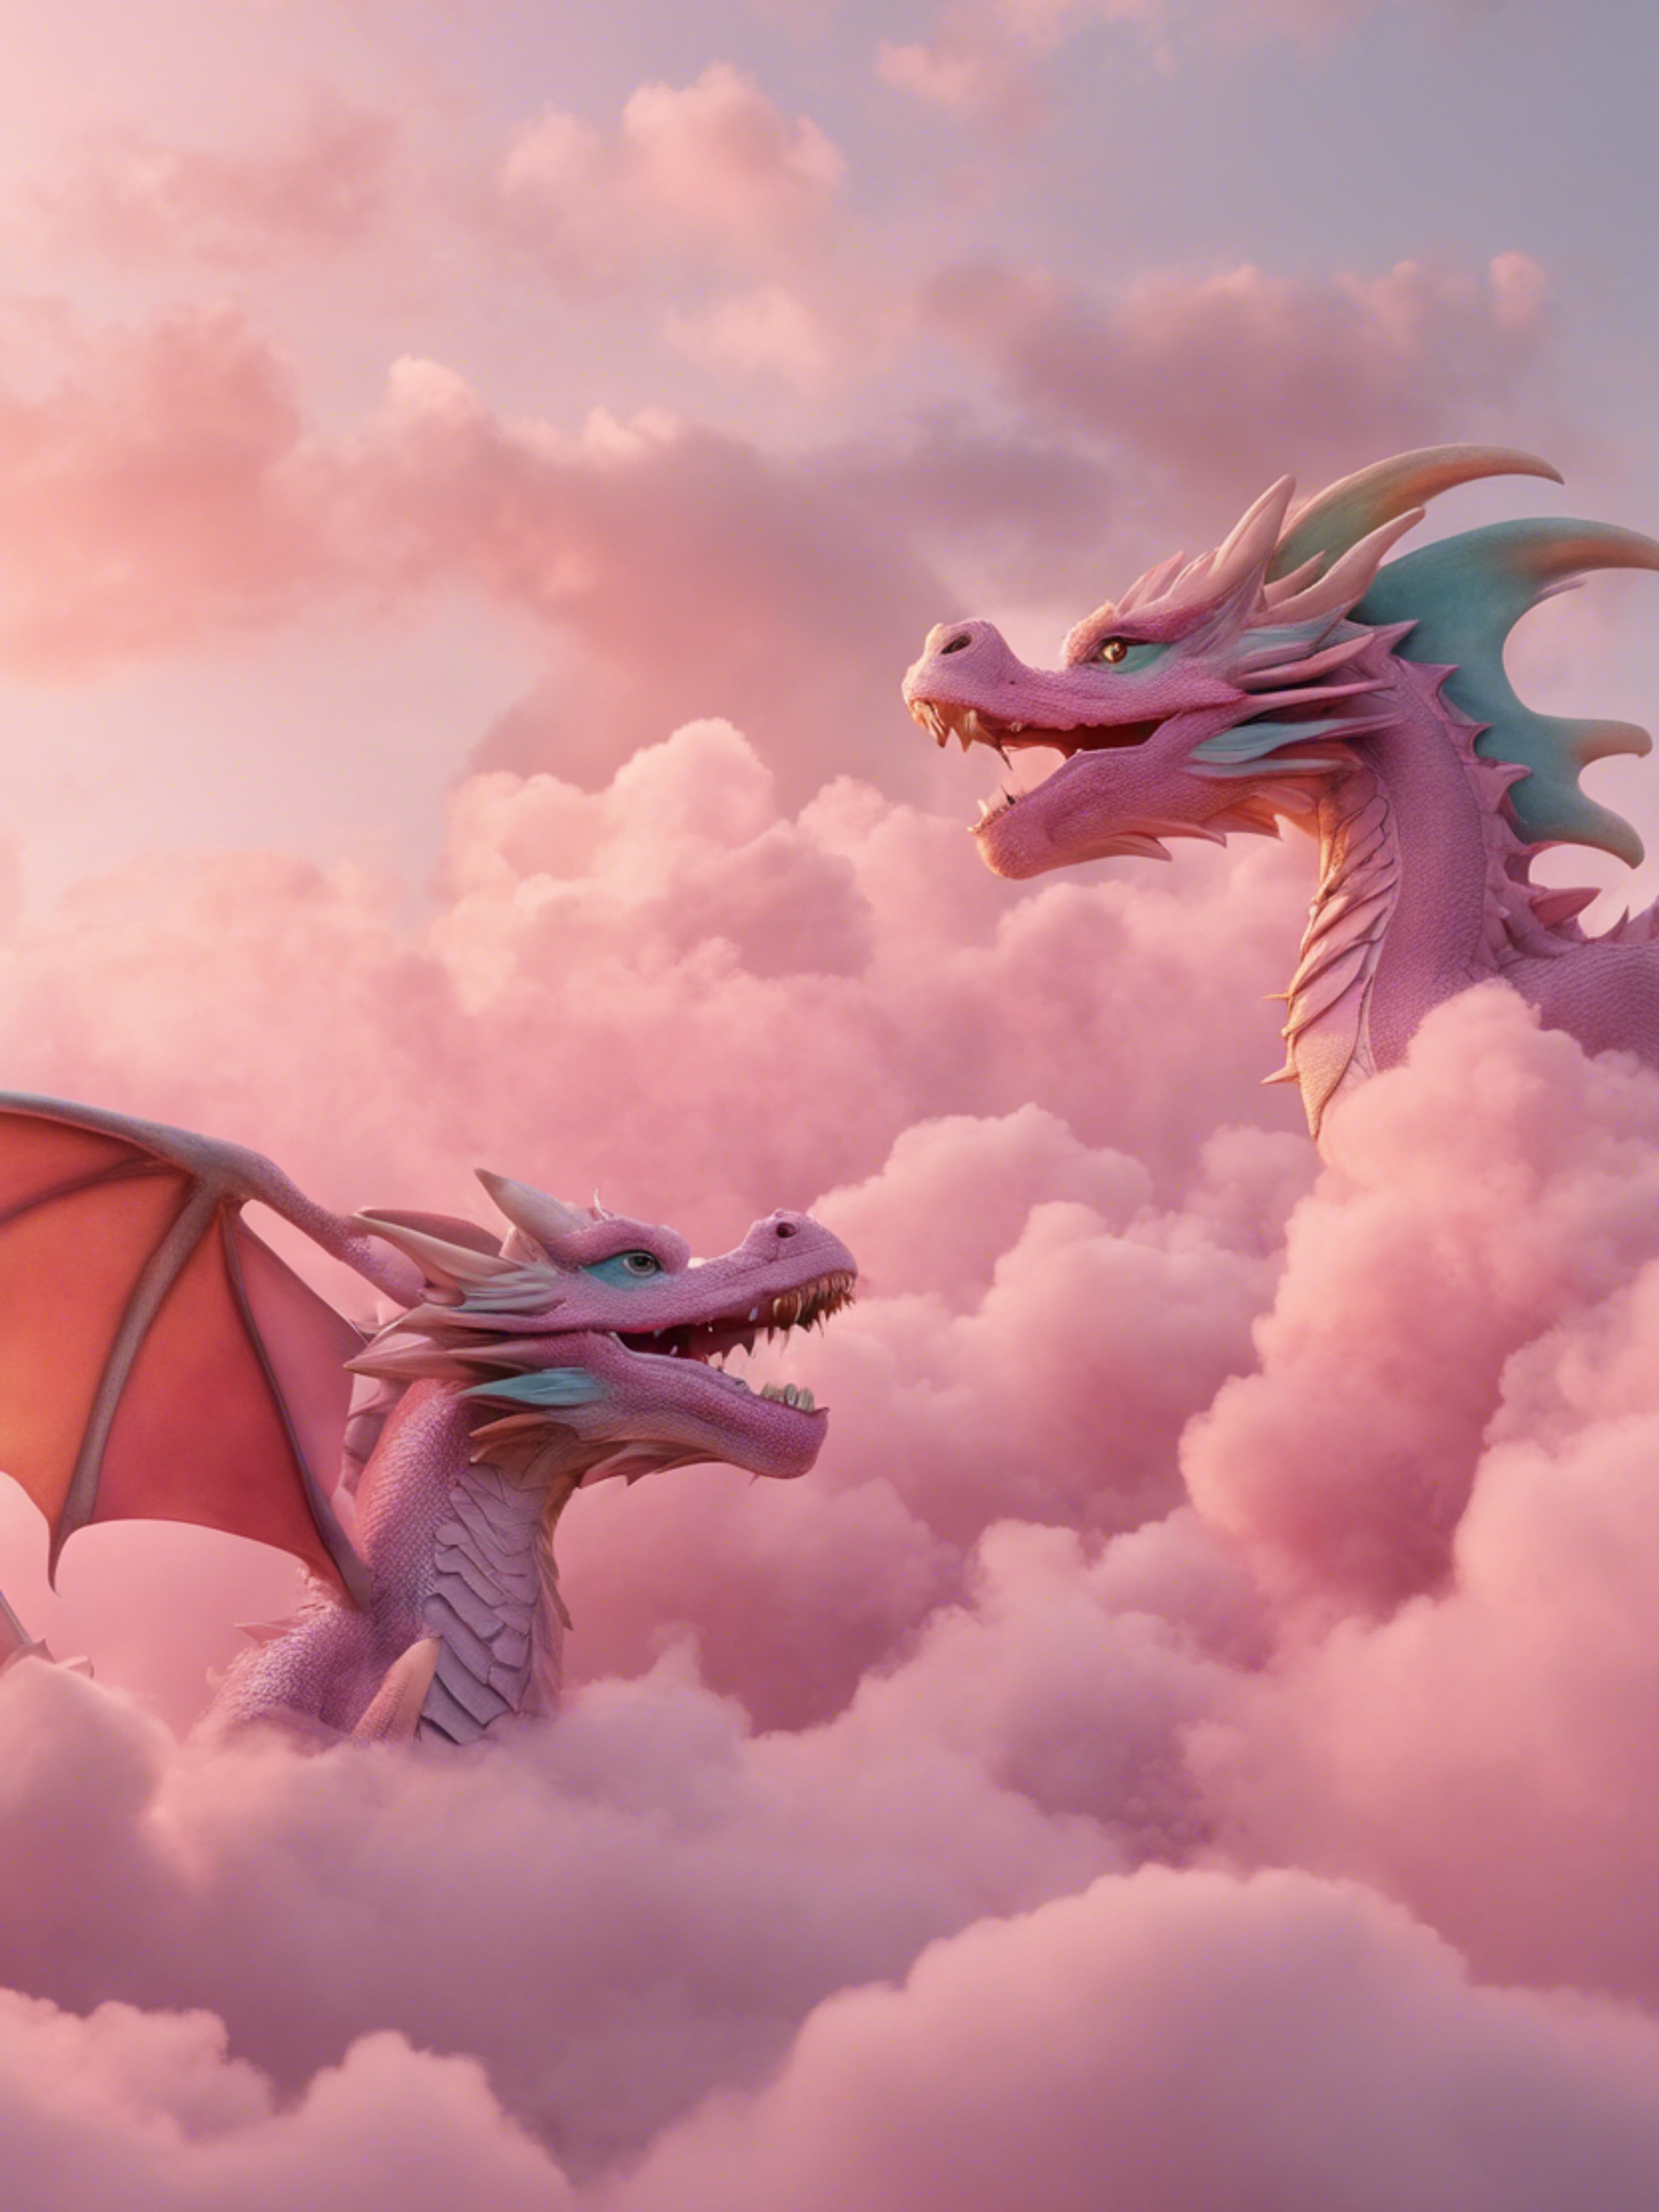 Trio of playful pastel-colored dragons flitting among fluffy pink clouds during sunrise. Tapet[e1ca69721ca941939a18]